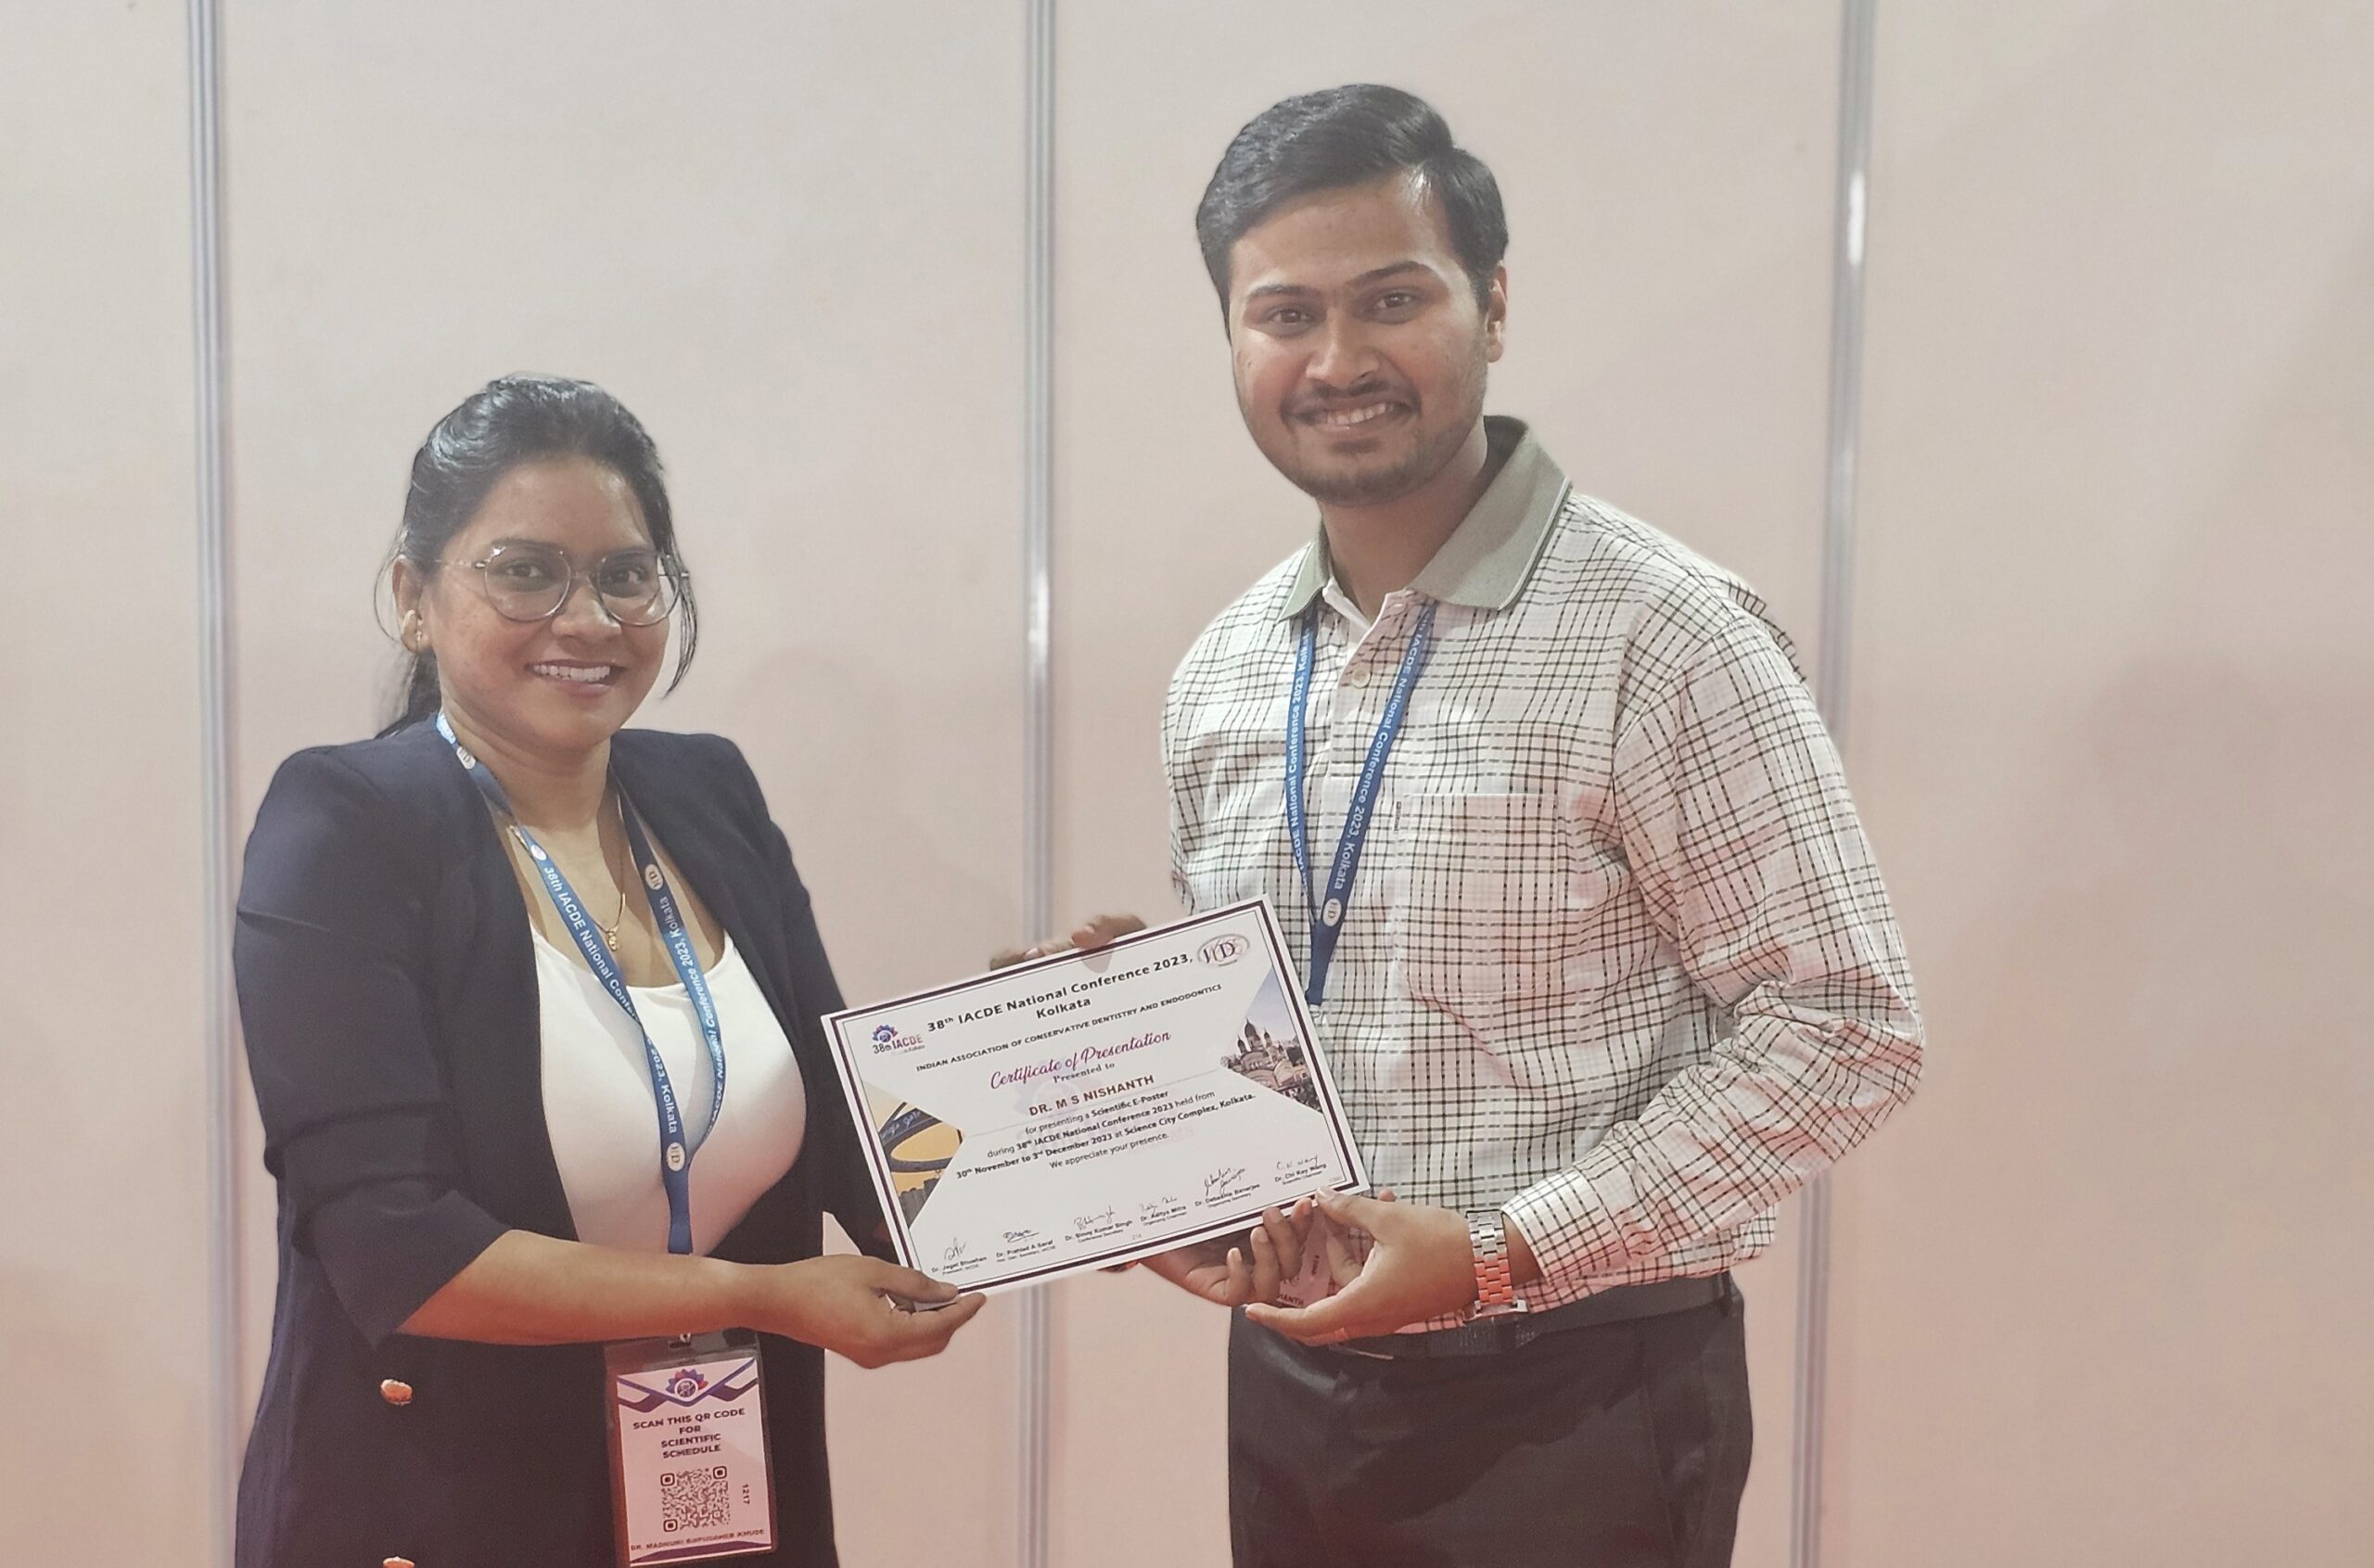 Navodaya Dental College -38th IACDE conference (Indian Association of Conservative Dentistry and Endodontics) was held in Kolkata from 30th November to 3rd December 2023